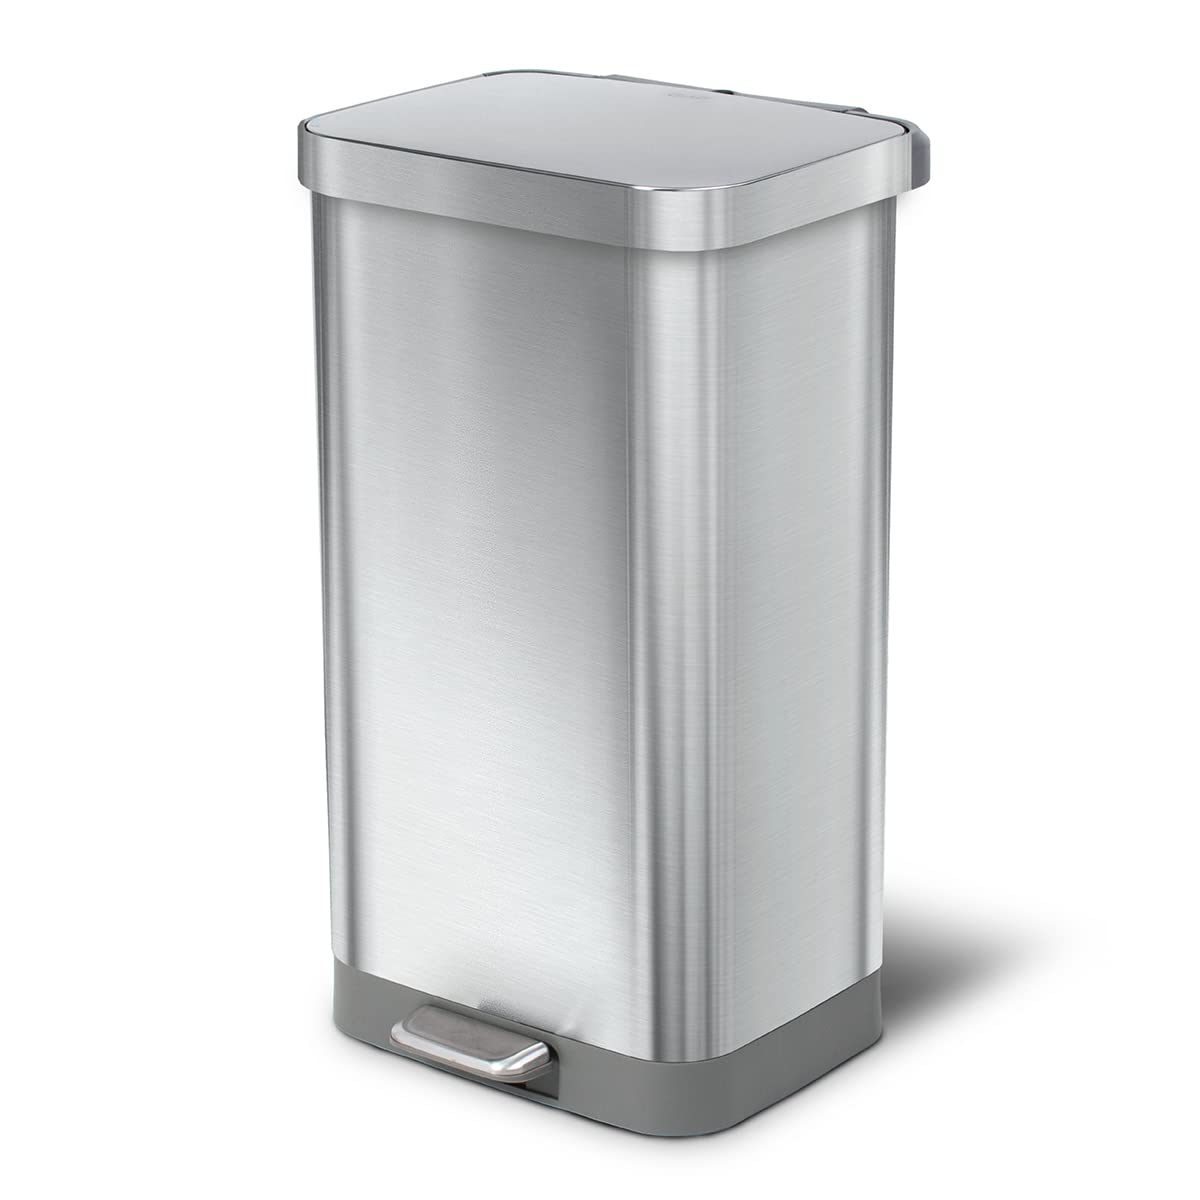 https://bigbigmart.com/wp-content/uploads/2023/07/Glad-Stainless-Steel-Step-Trash-Can-with-Clorox-Odor-Protection-Large-Metal-Kitchen-Garbage-Bin-with-Soft-Close-Lid-Foot-Pedal-and-Waste-Bag-Roll-Holder-20-Gallon-All-Stainless.jpg